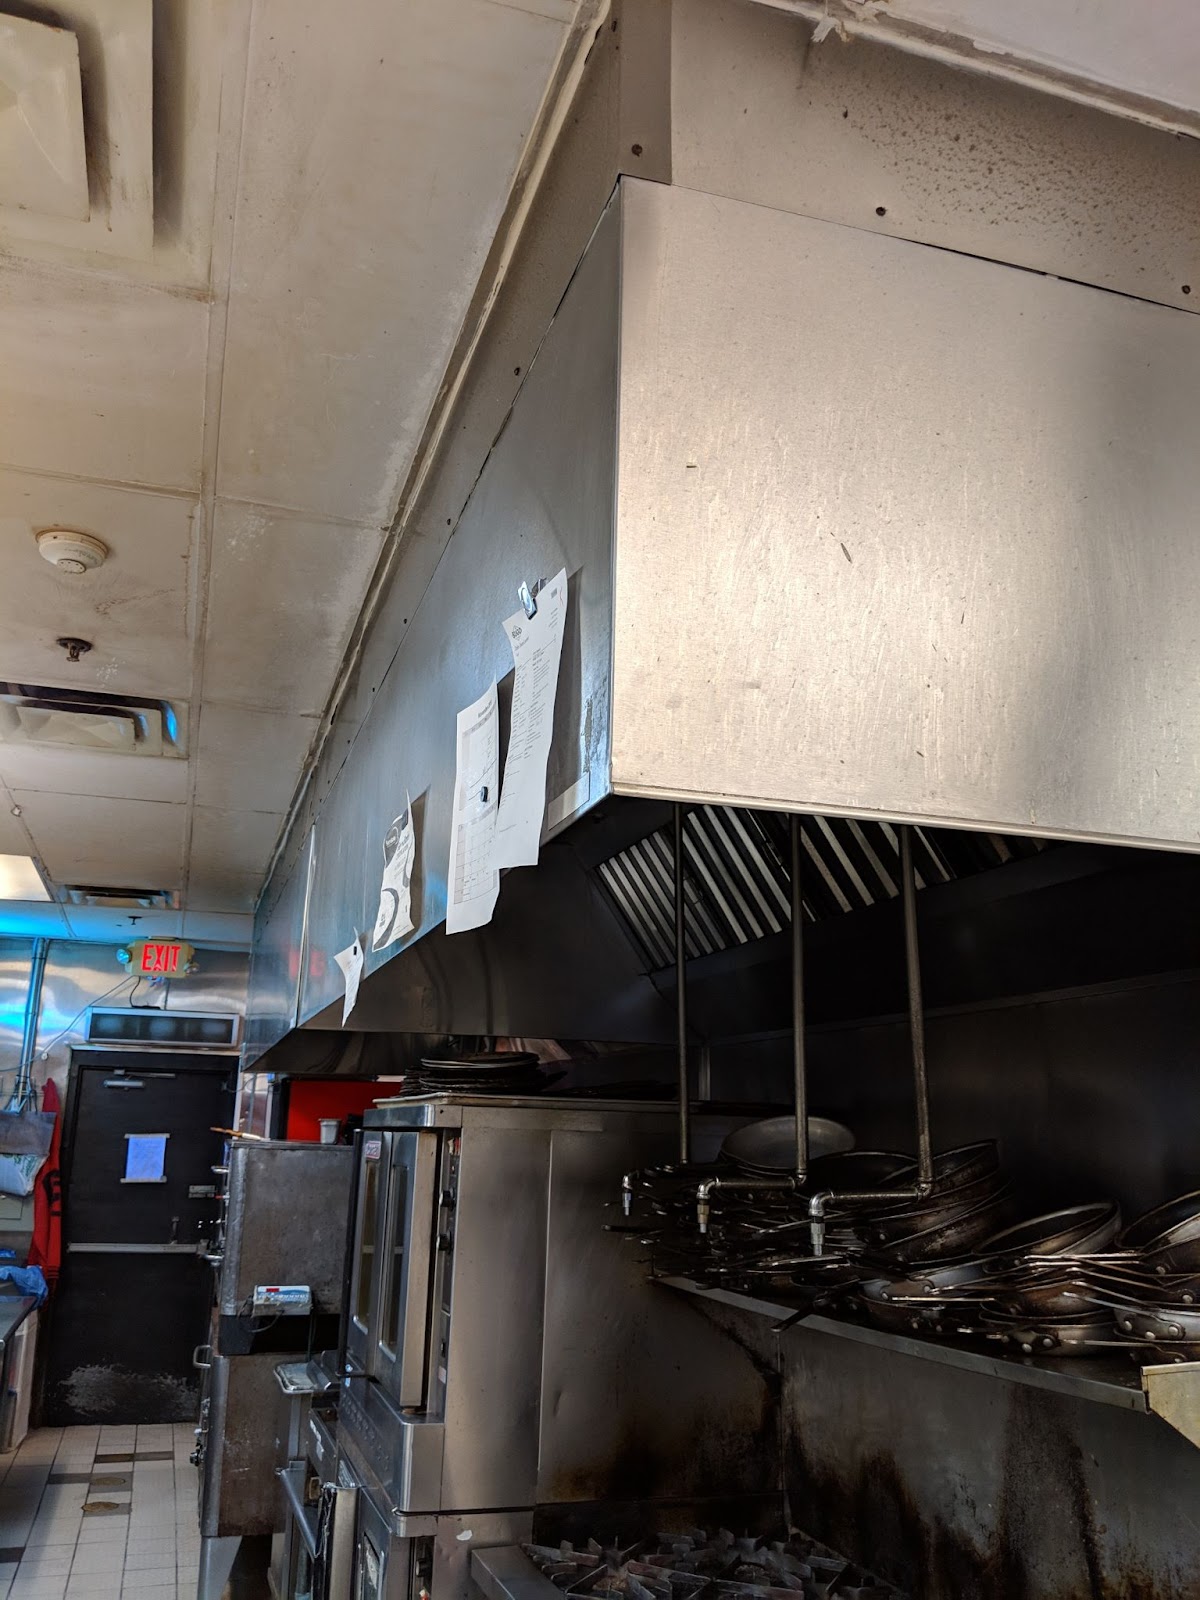 Choosing the Right Commercial Kitchen Exhaust Hood - Halo Restoration  Services